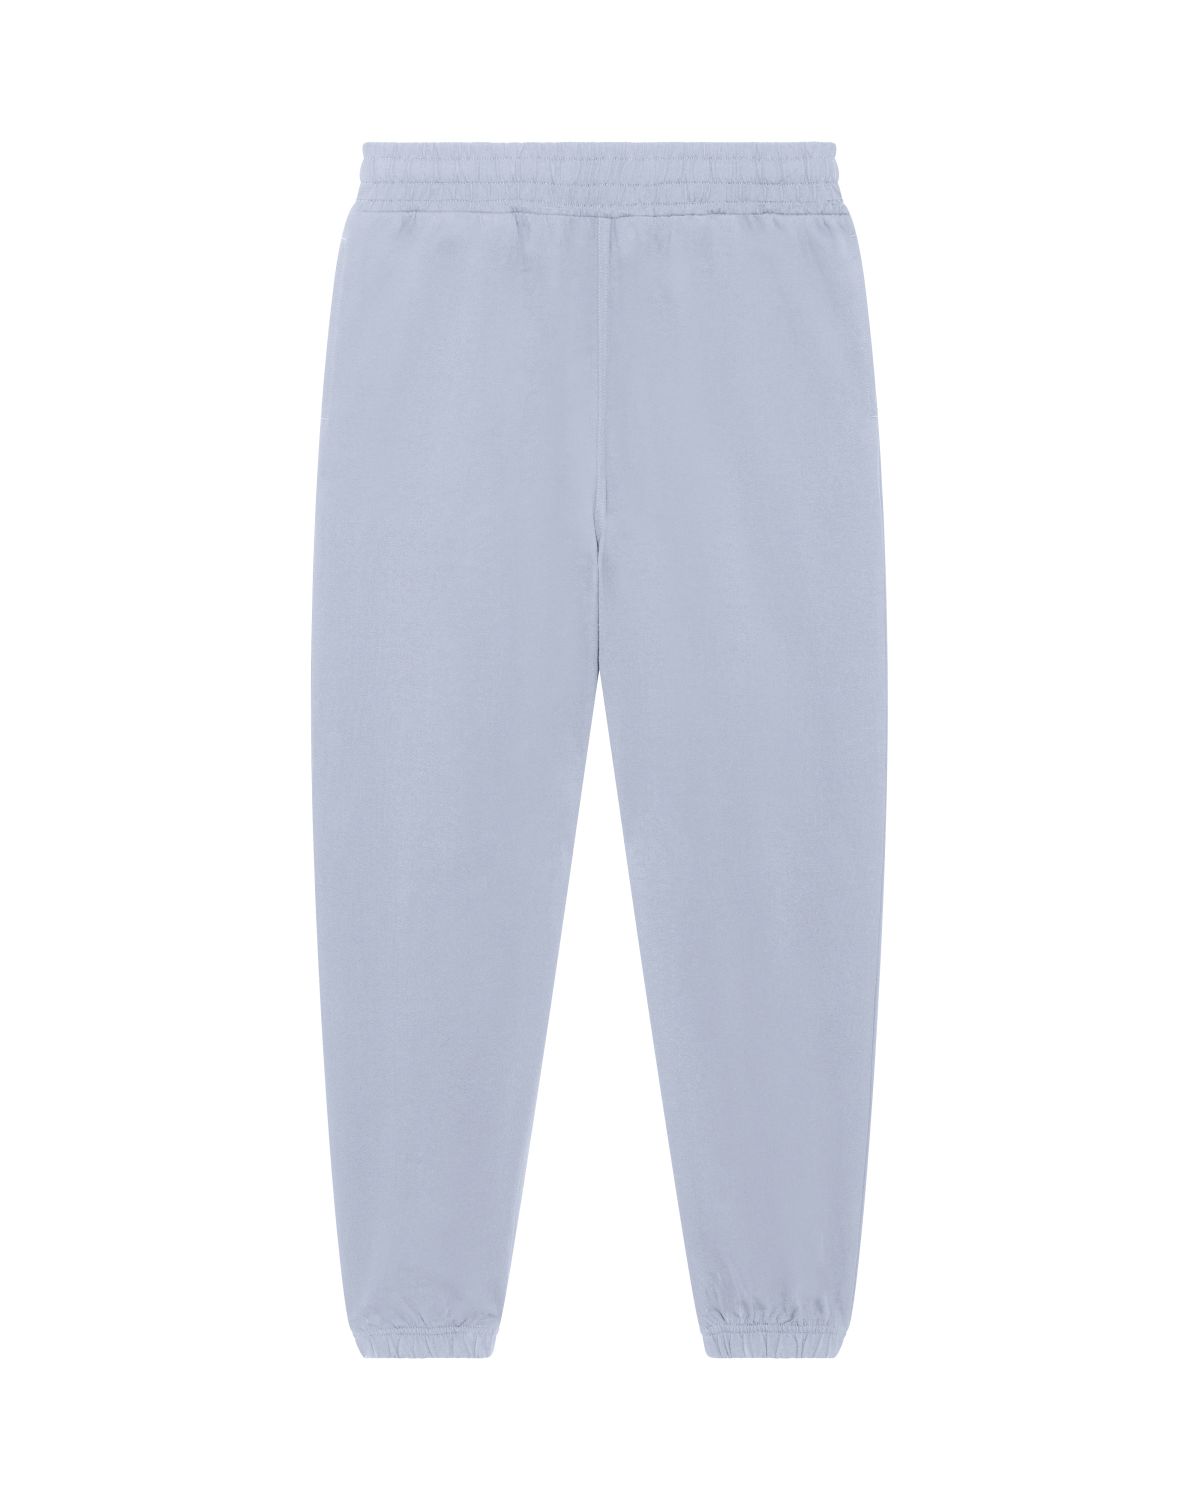 customize your own sweatpants